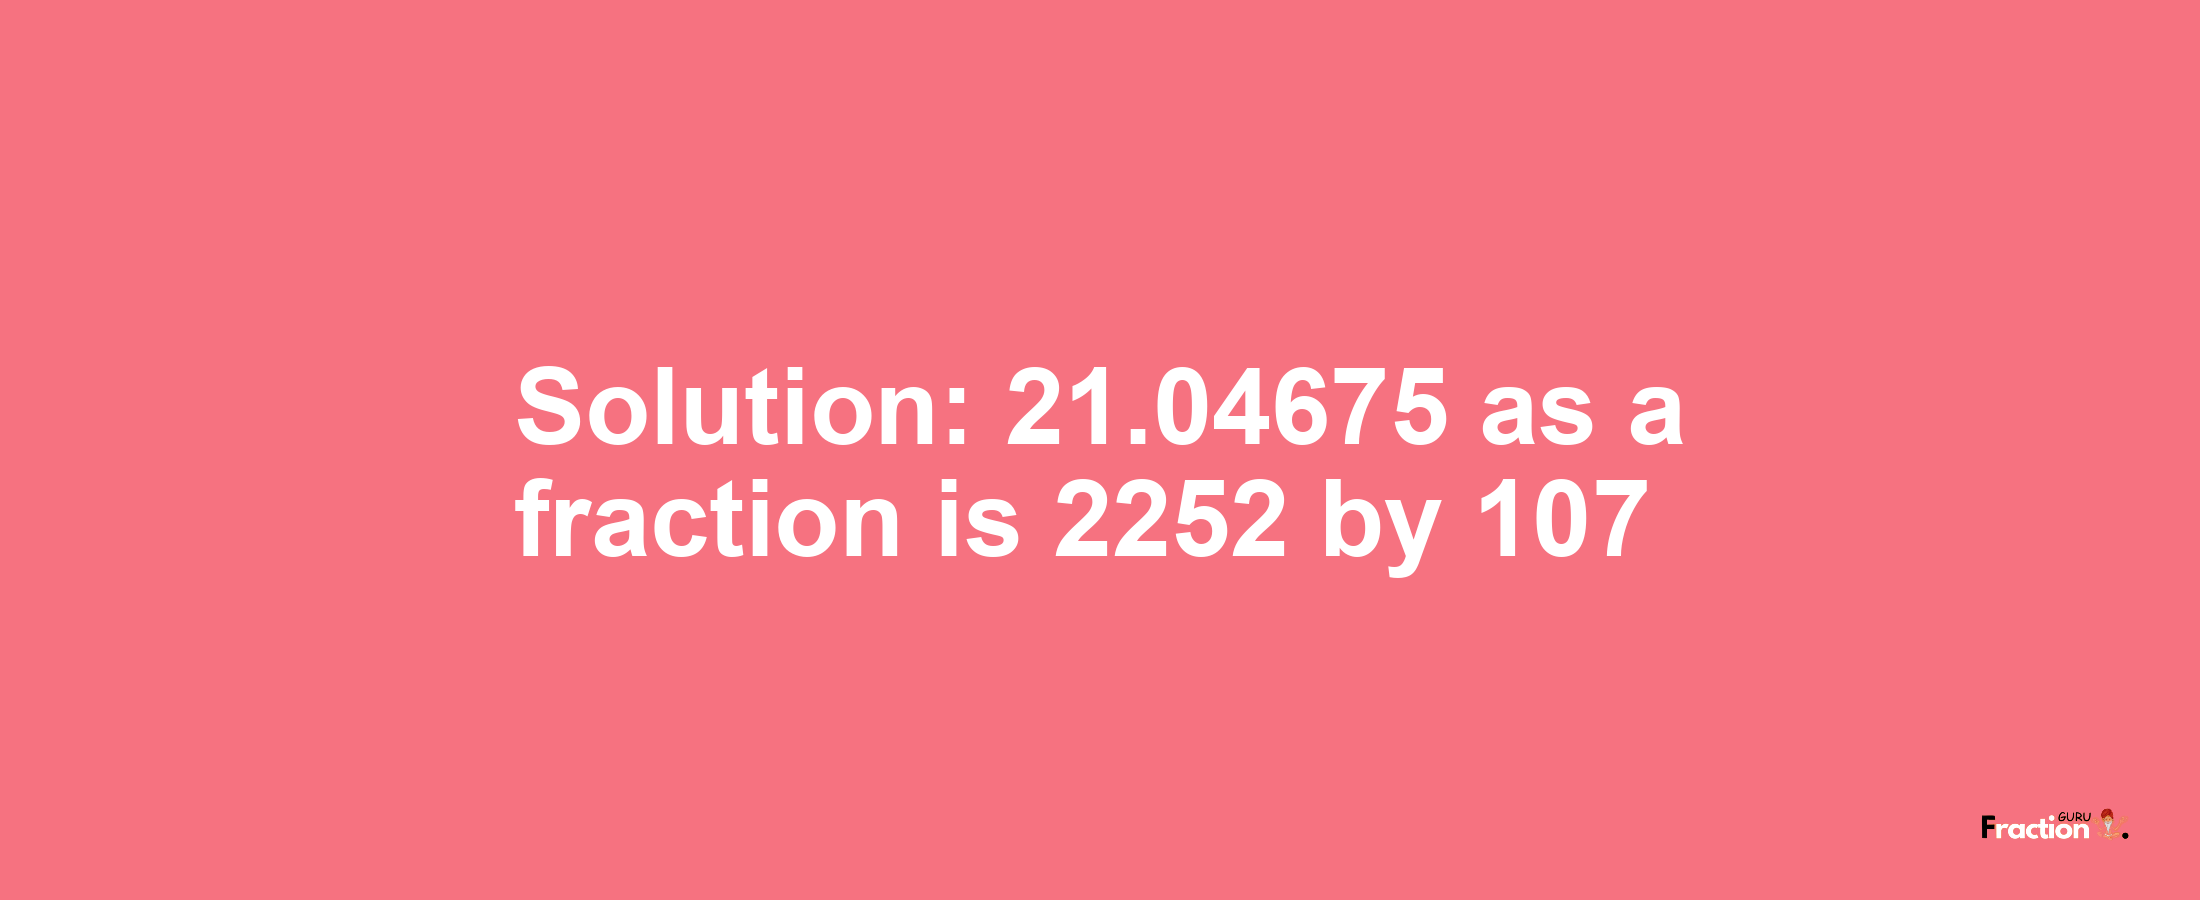 Solution:21.04675 as a fraction is 2252/107